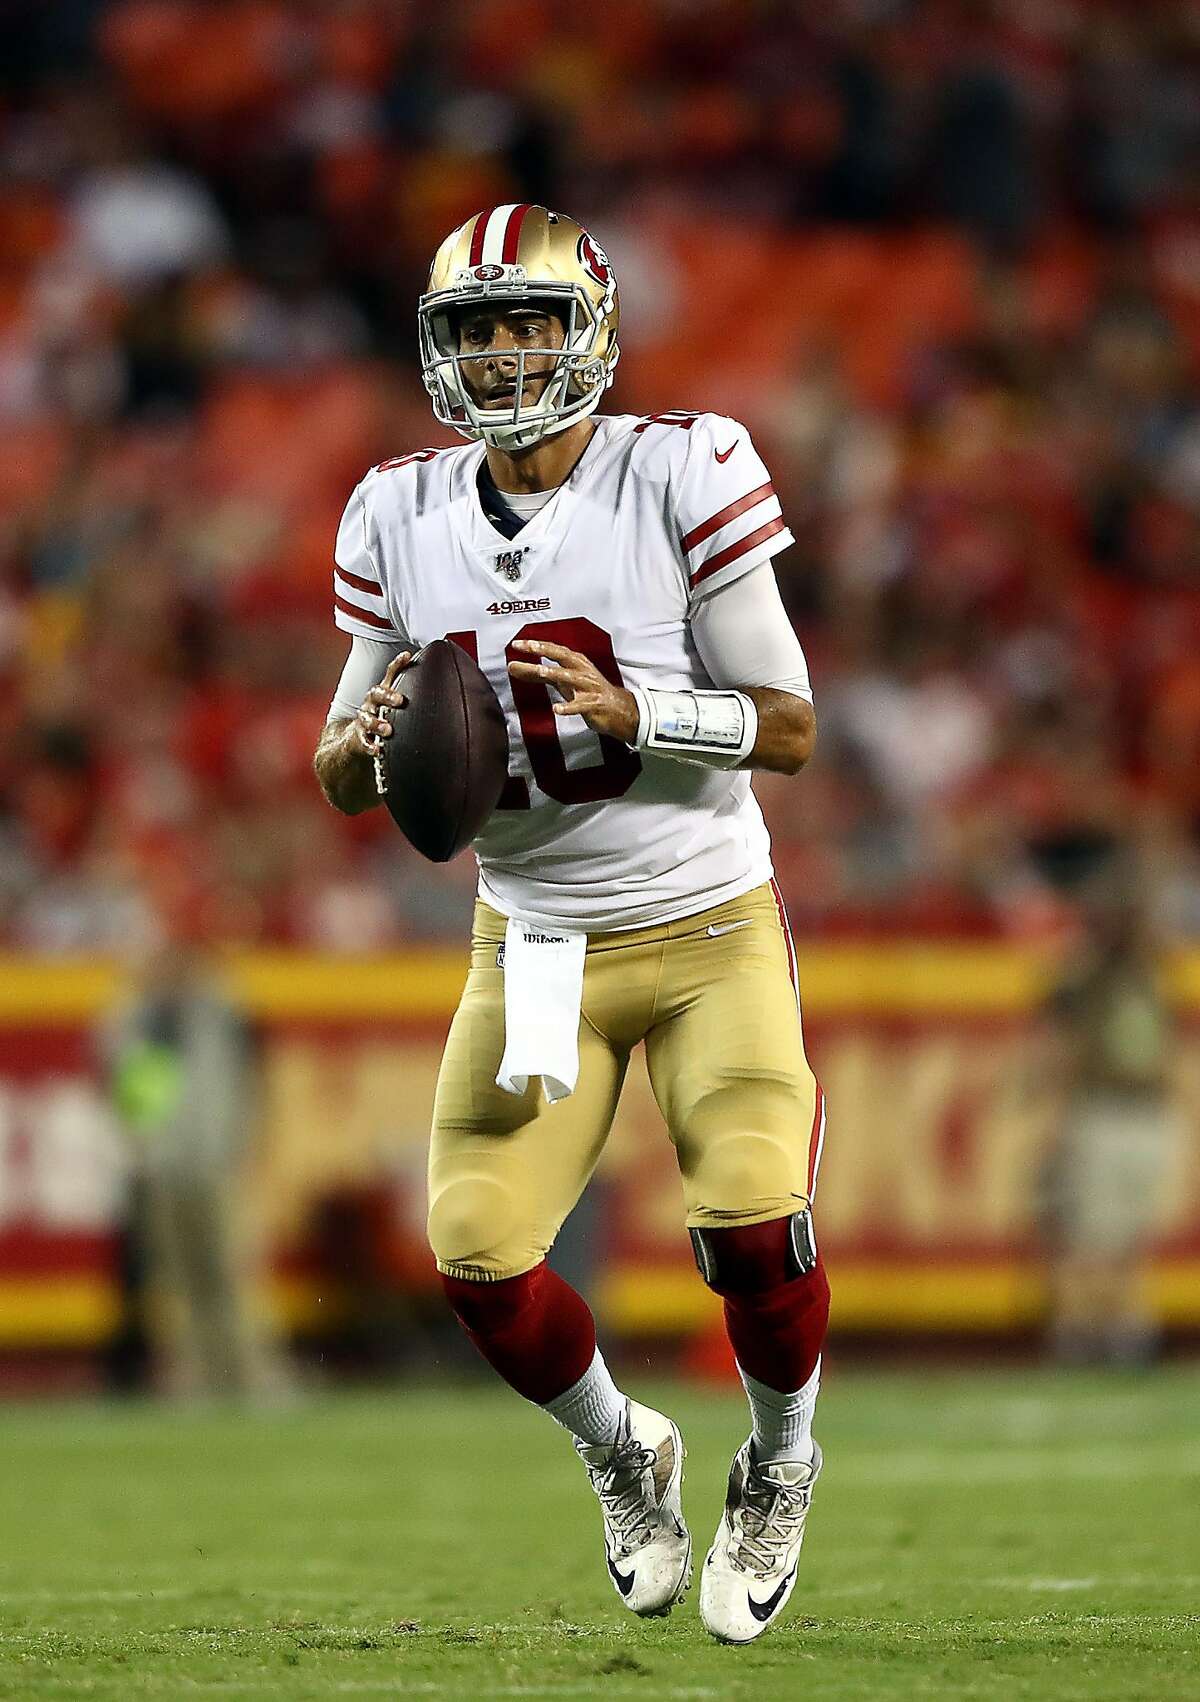 Quarterback Jimmy Garoppolo #10 of the San Francisco 49ers looks to pass during the preseason game against the Kansas City Chiefs at Arrowhead Stadium on August 24, 2019 in Kansas City, Missouri. (Photo by Jamie Squire/Getty Images)